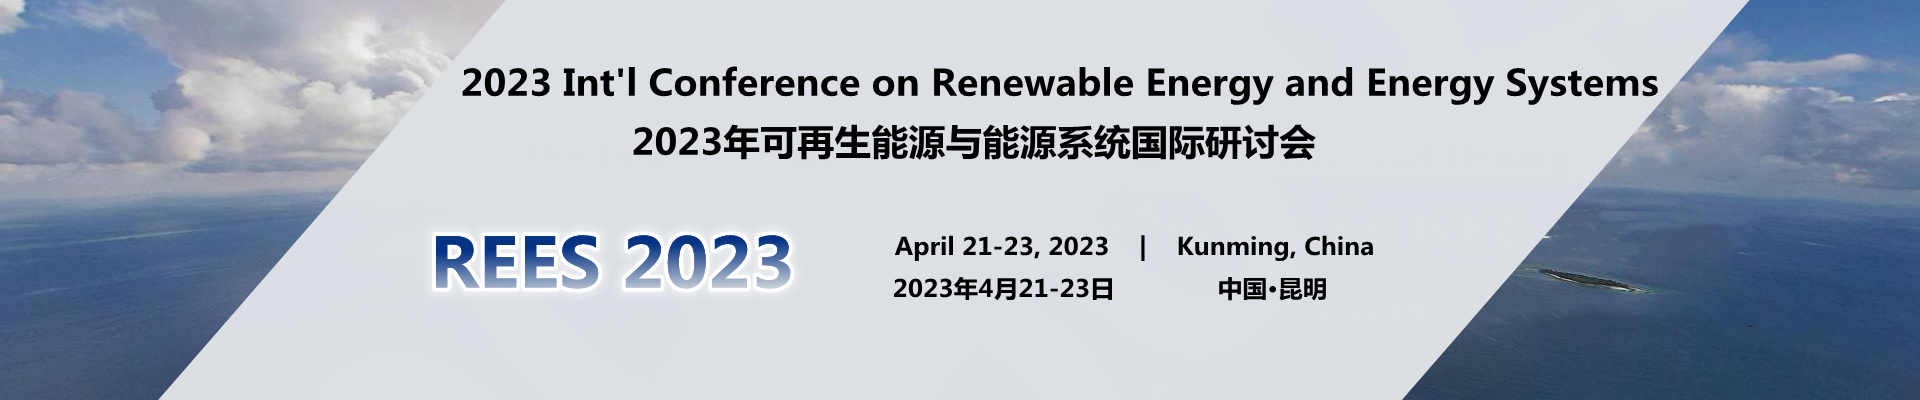 2023 Int'l Conference on Renewable Energy and Energy Systems (REES 2023), Kunming, Yunnan, China